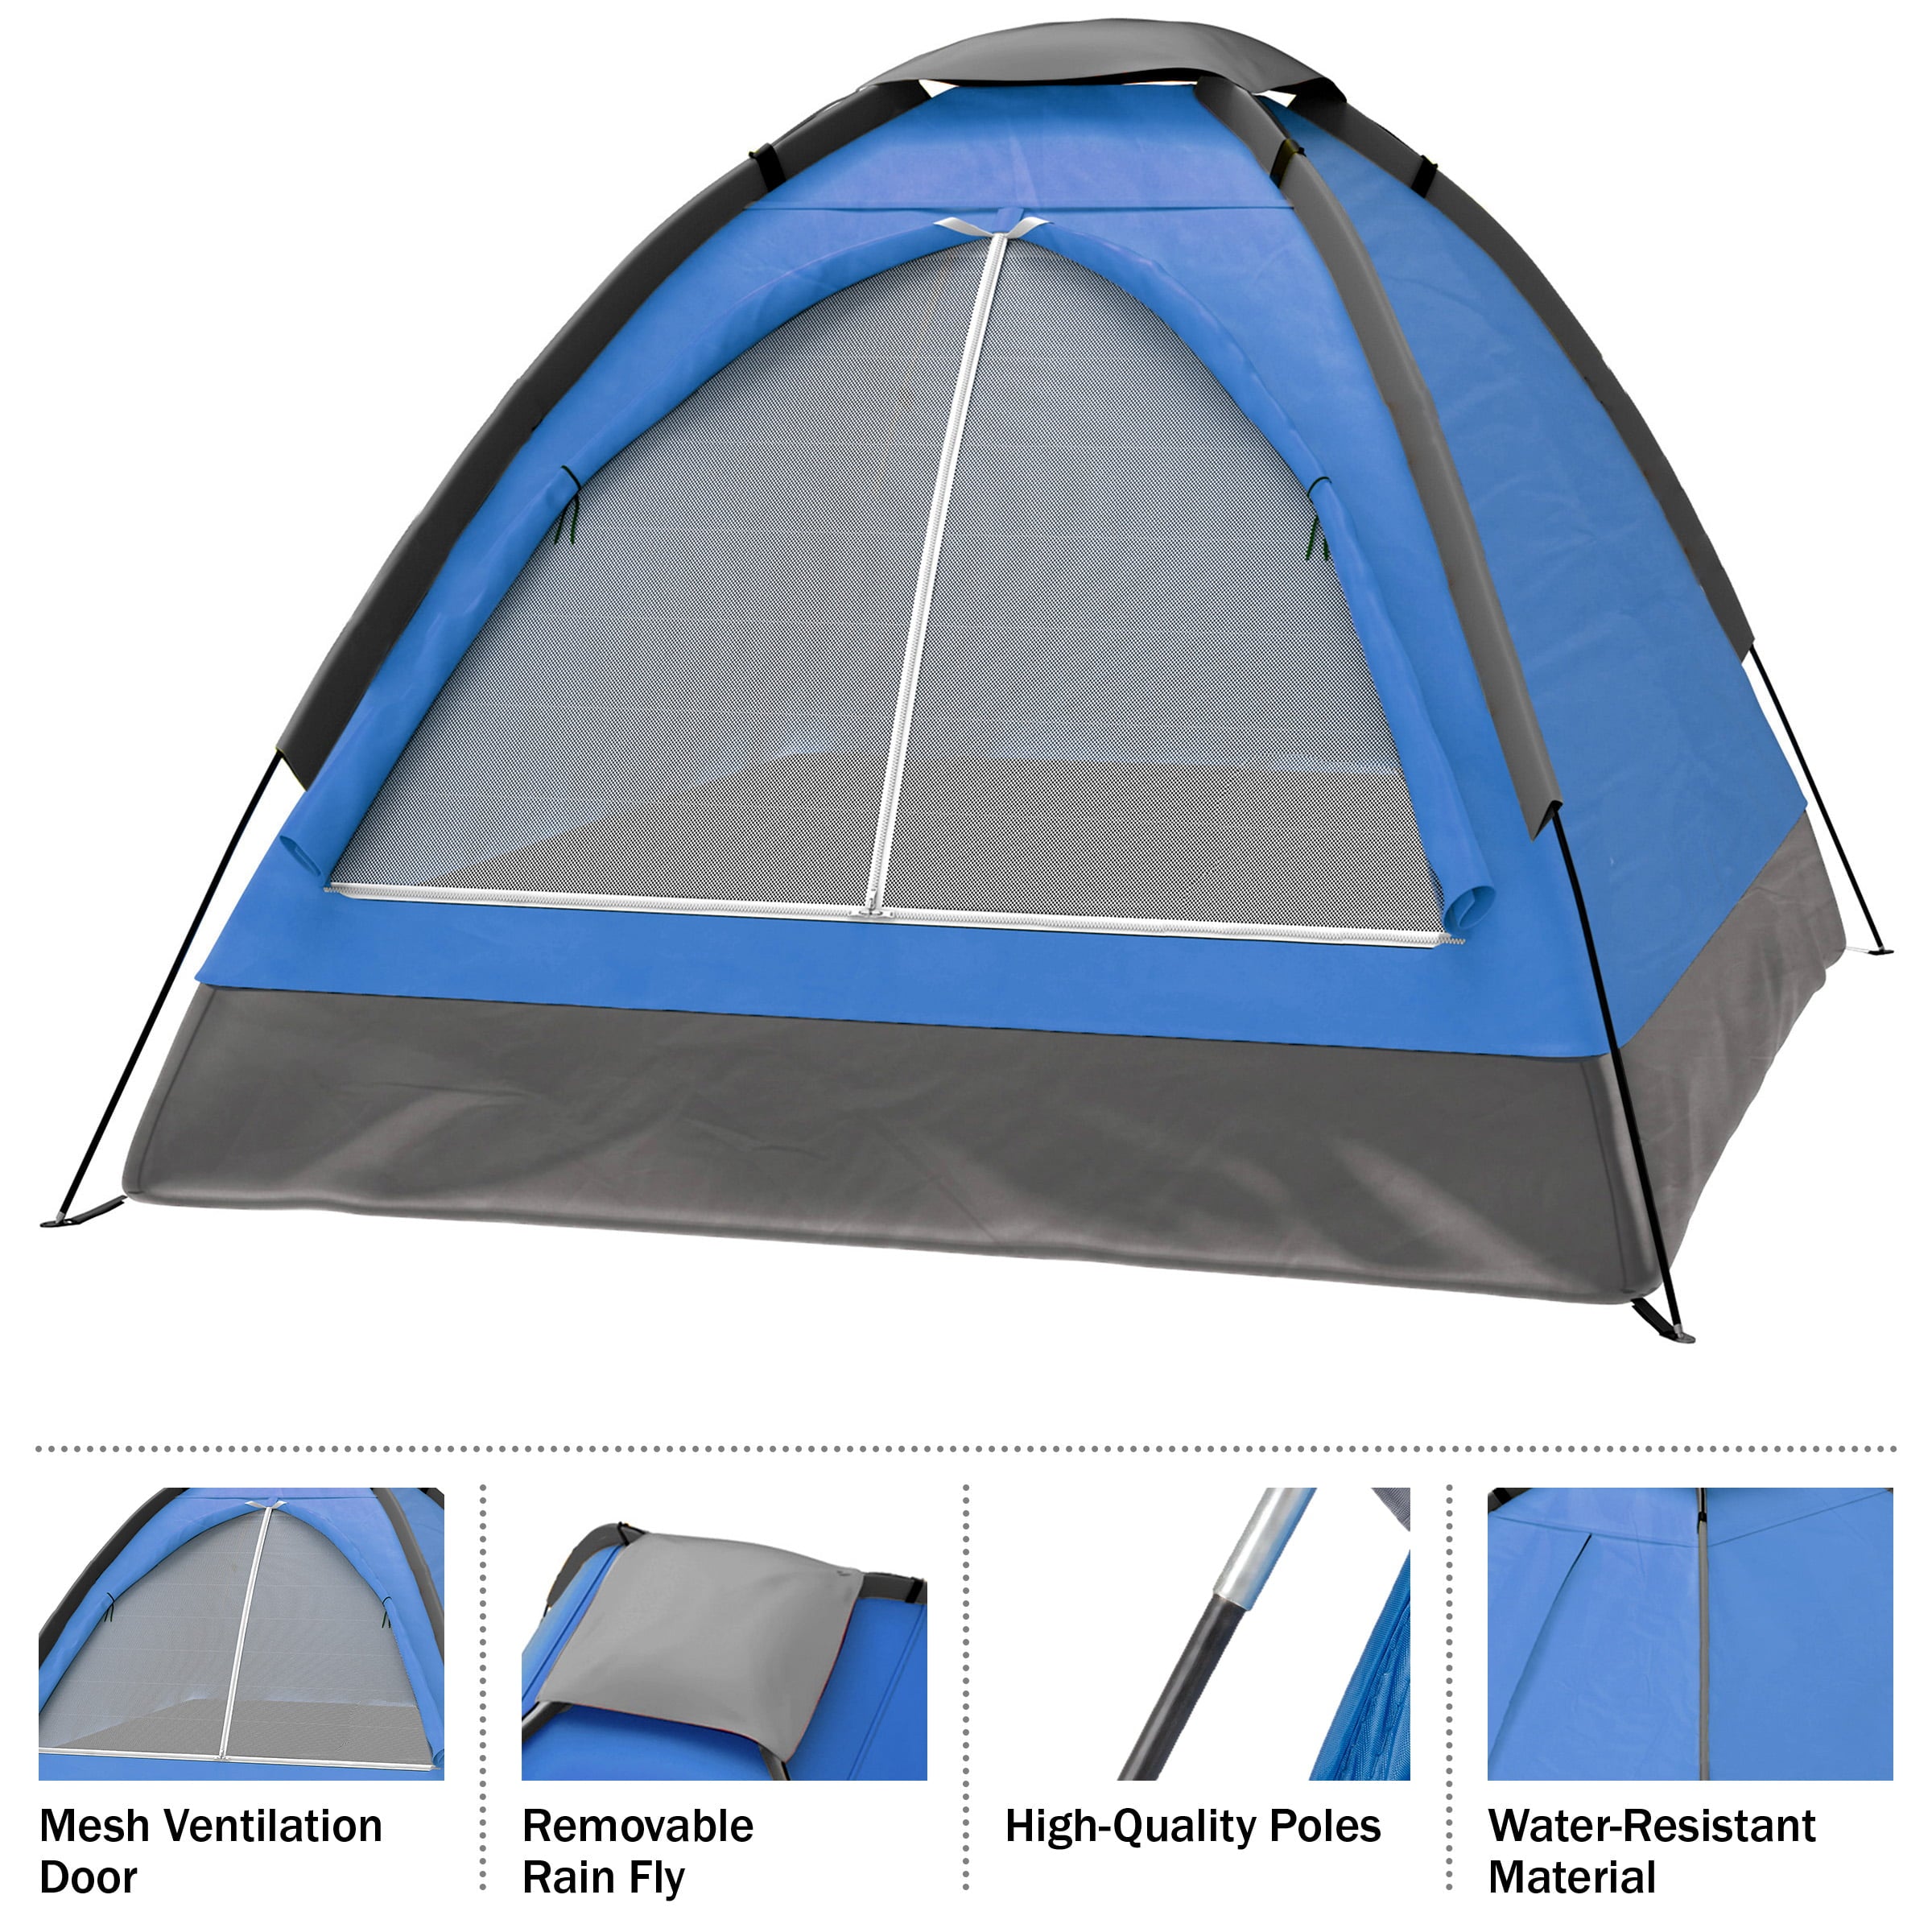 2 Person Camping Tent – Includes Rain Fly and Carrying Bag – Lightweight Outdoor Tent for Backpacking， Hiking， or Beach by Wakeman Outdoors (Blue)